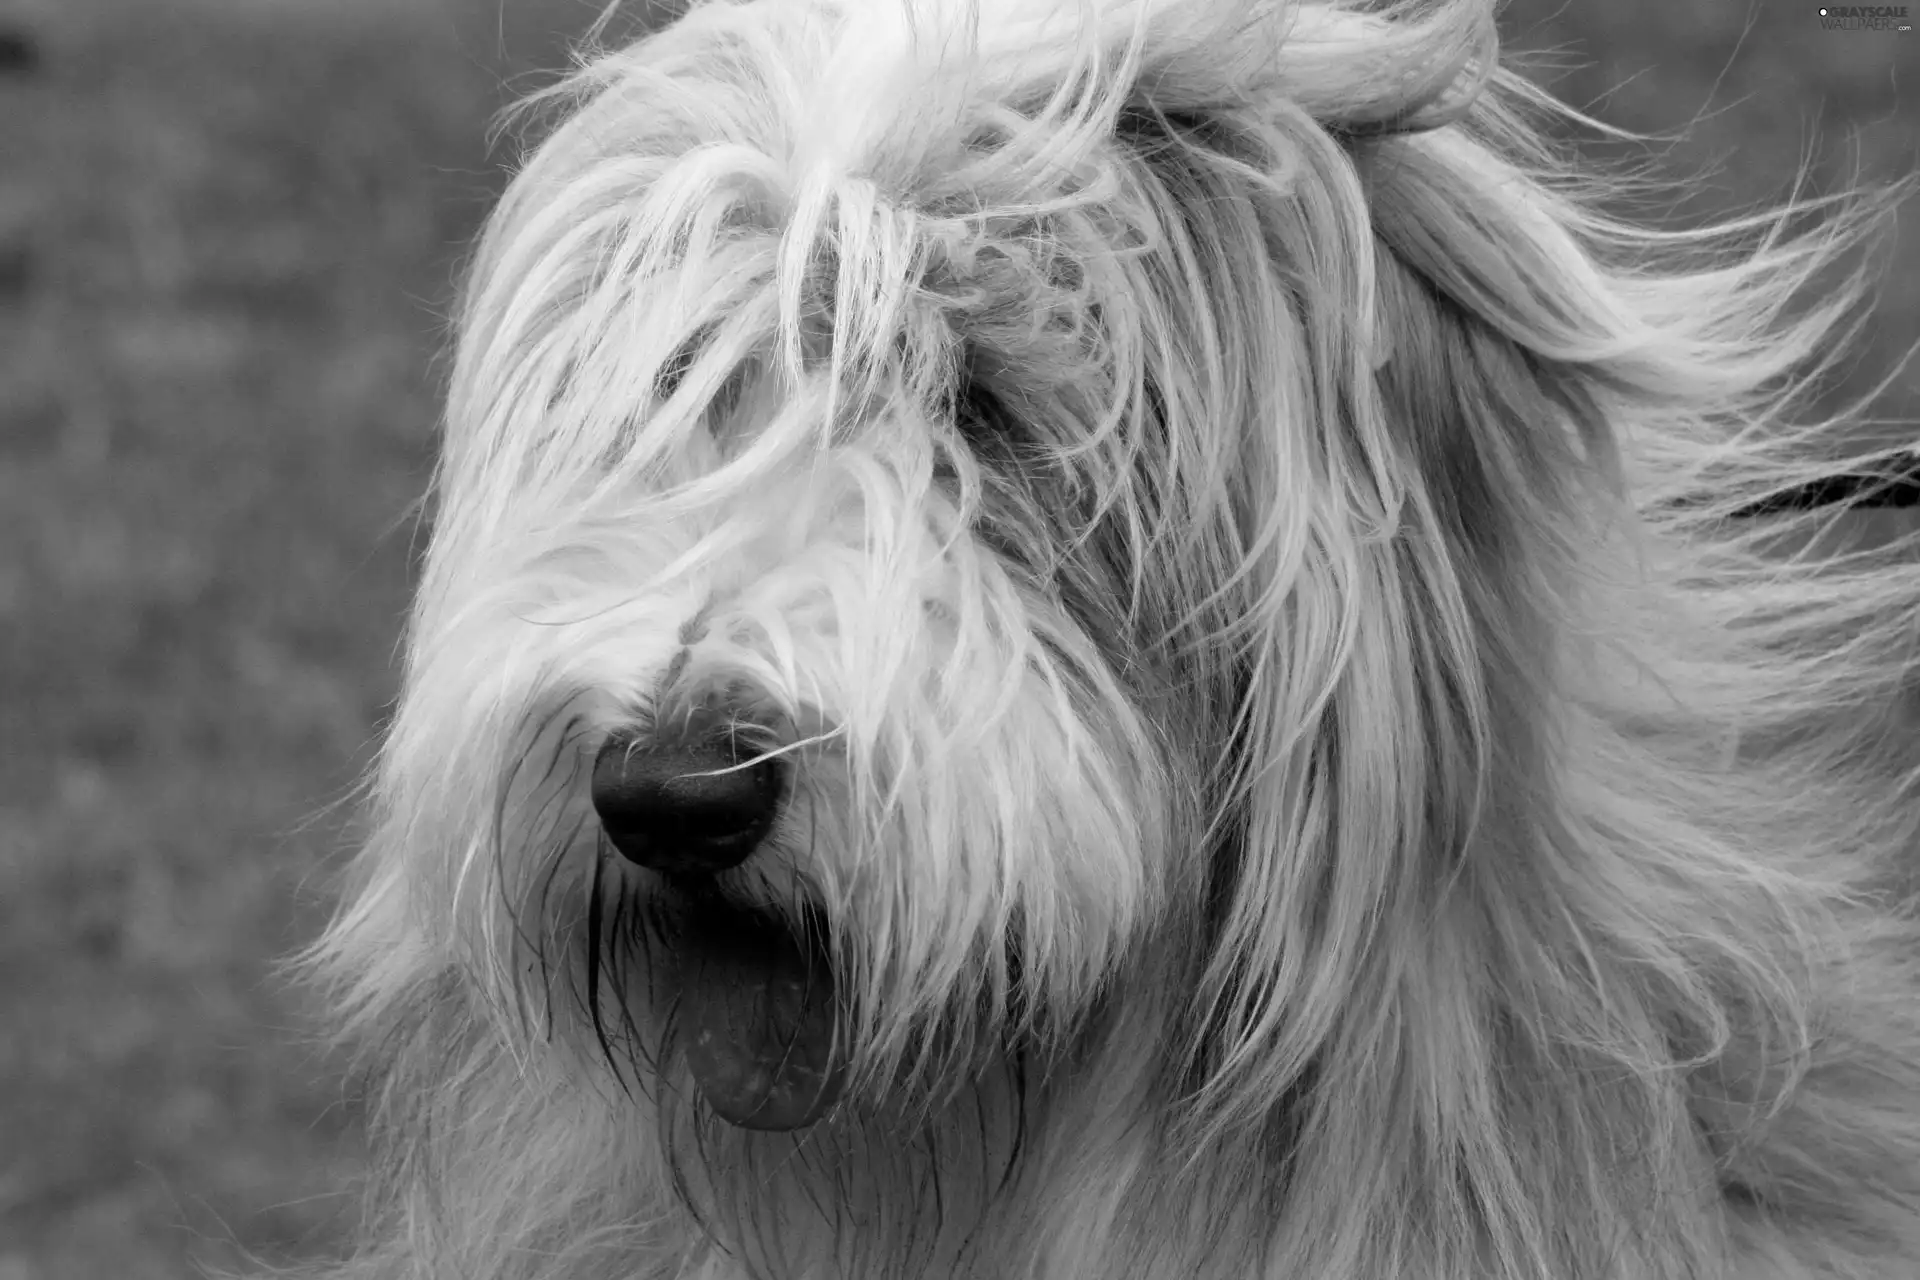 Bearded collie, Tounge